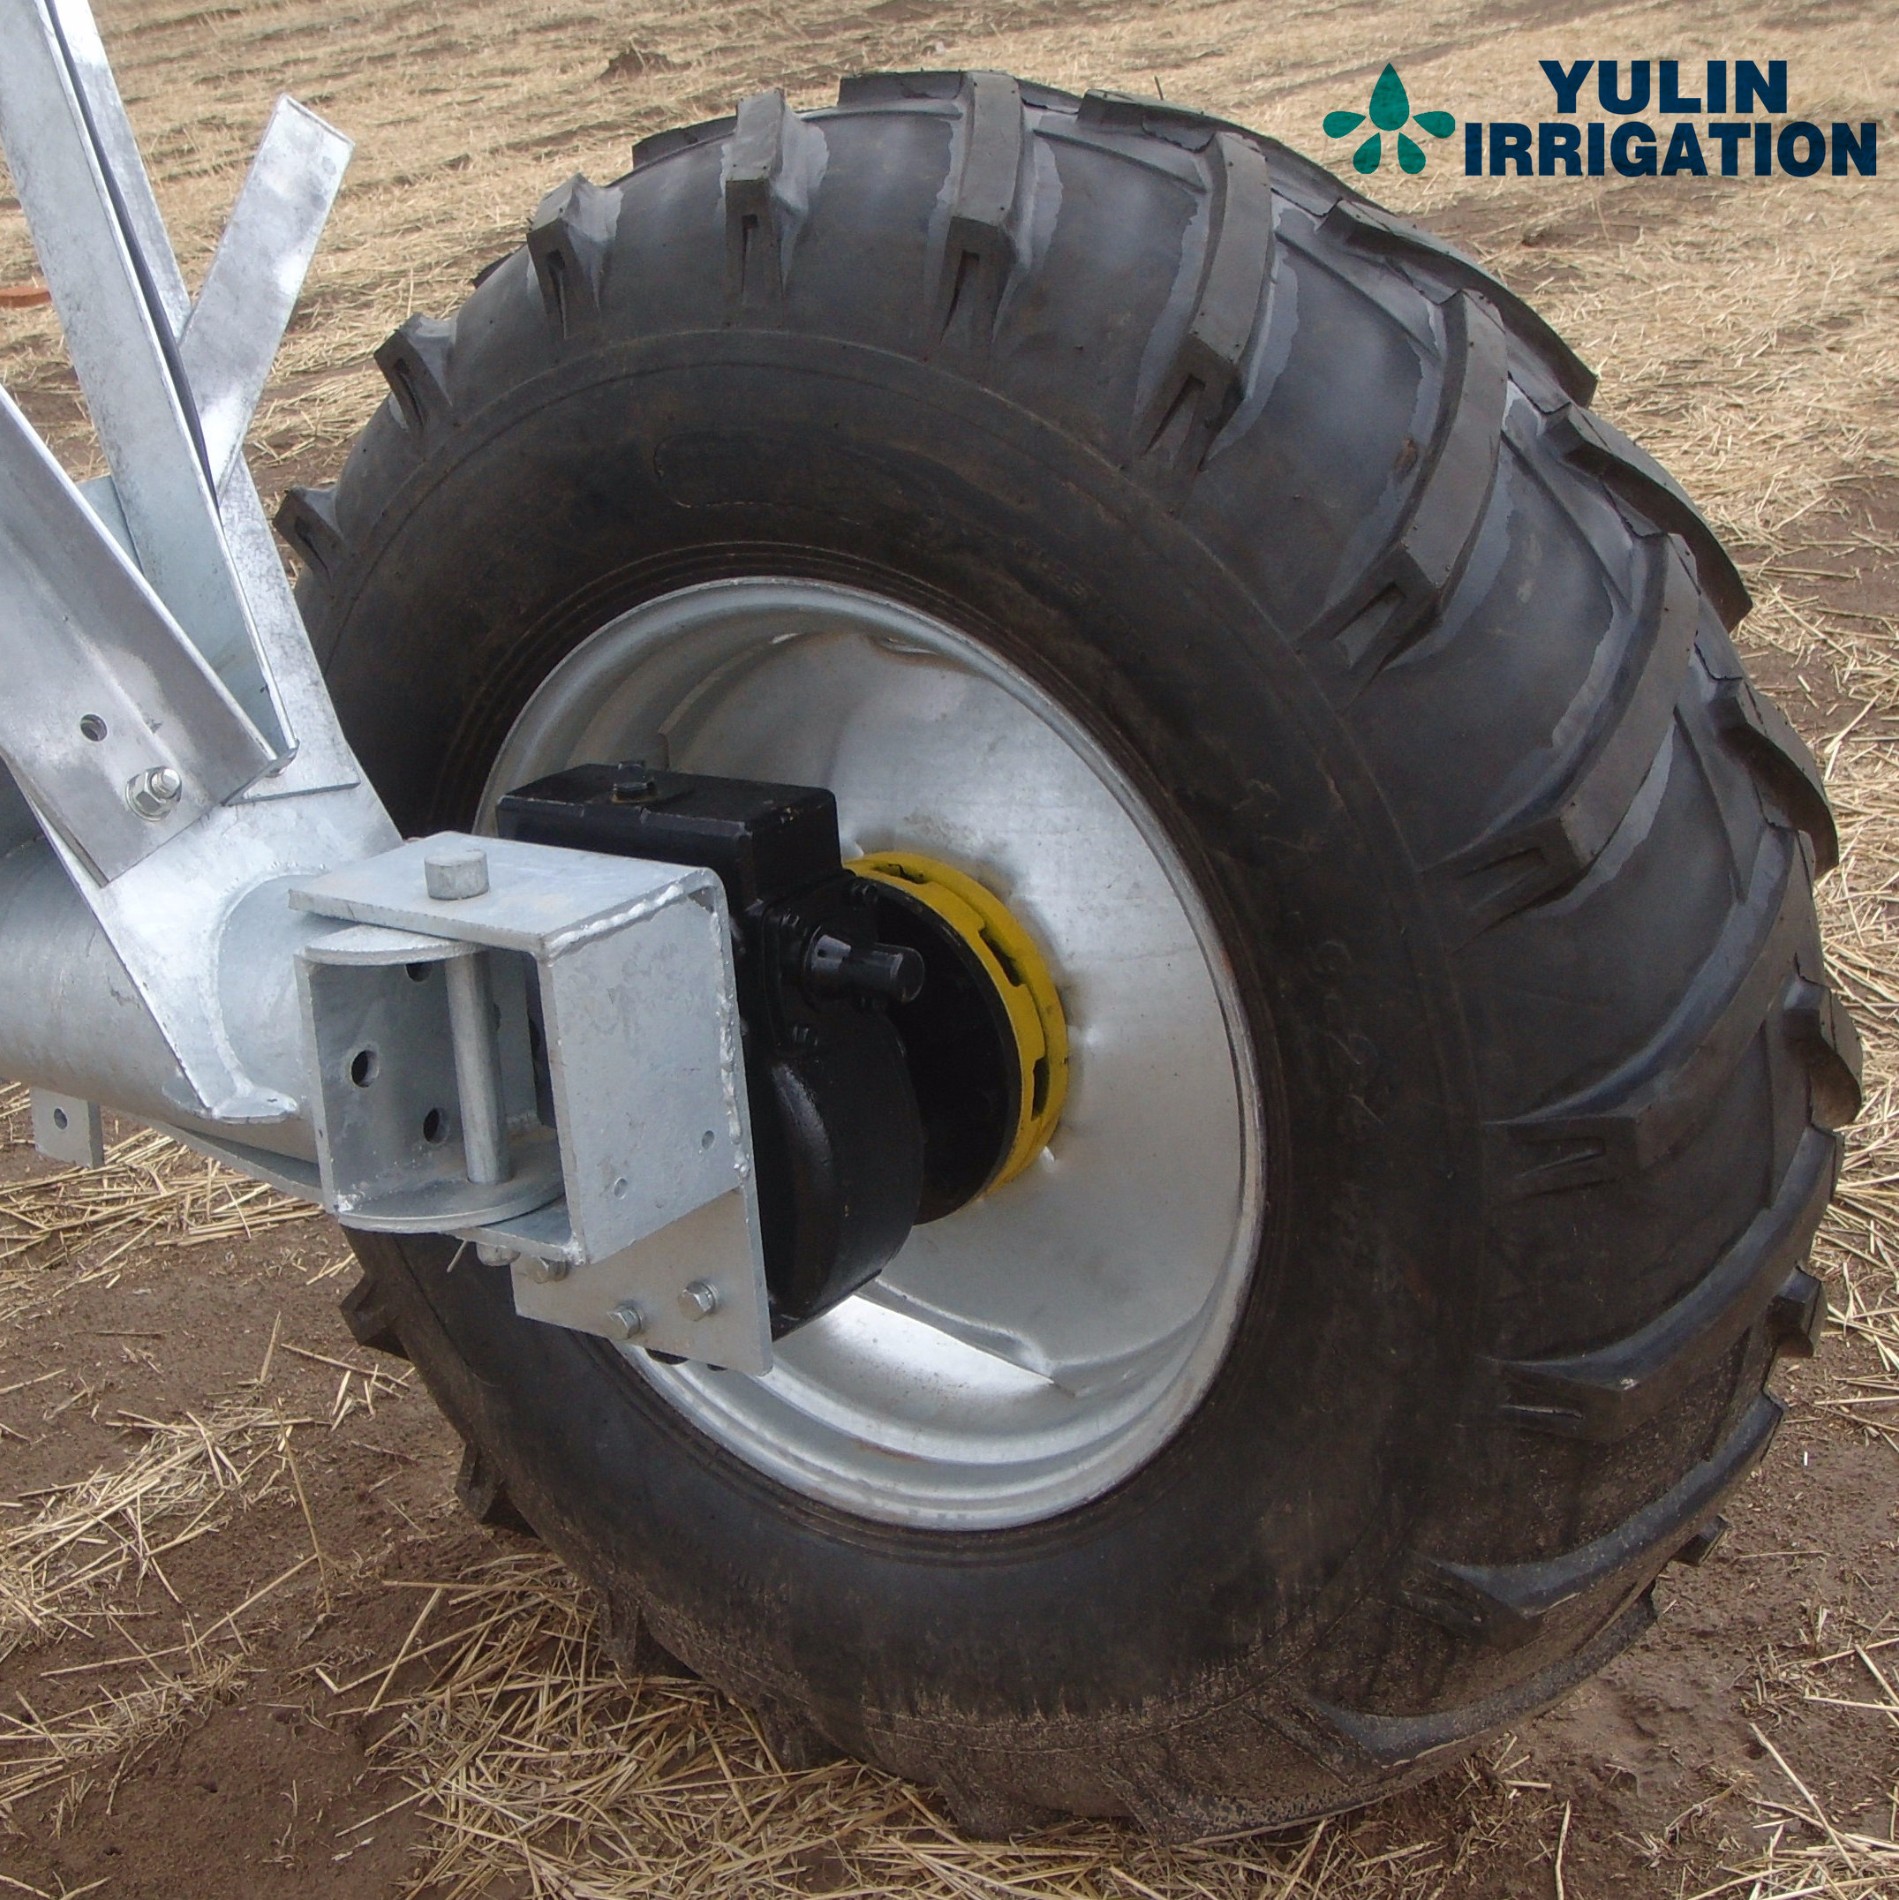 China Suppliers 14.9-24 Vacuum Tire for irrigation Manufacturers, China Suppliers 14.9-24 Vacuum Tire for irrigation Factory, Supply China Suppliers 14.9-24 Vacuum Tire for irrigation